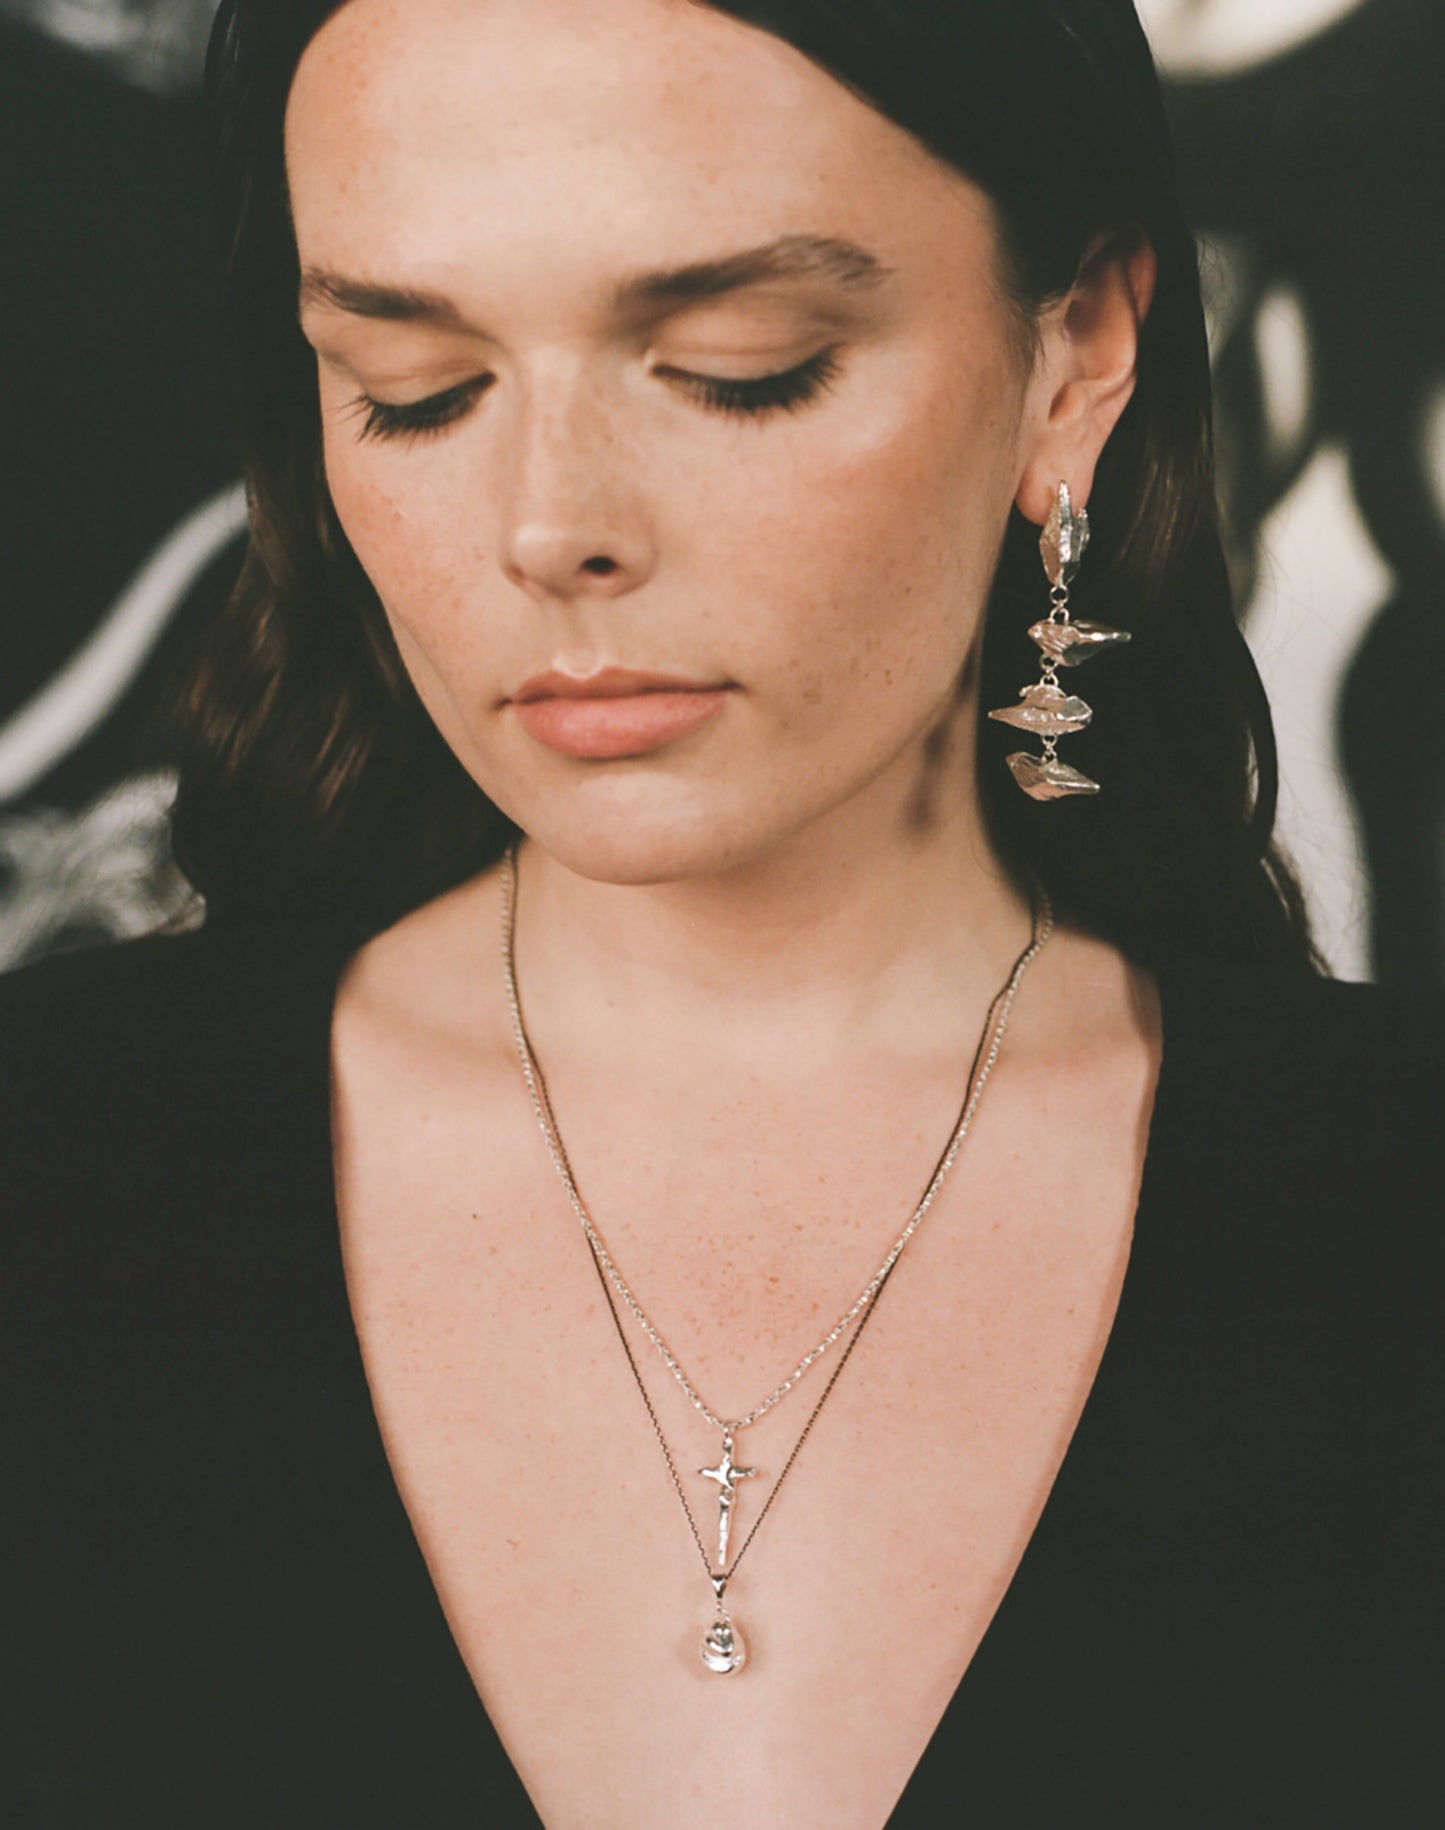 Model wearing crucifix necklace with statement Richard Murphy earring